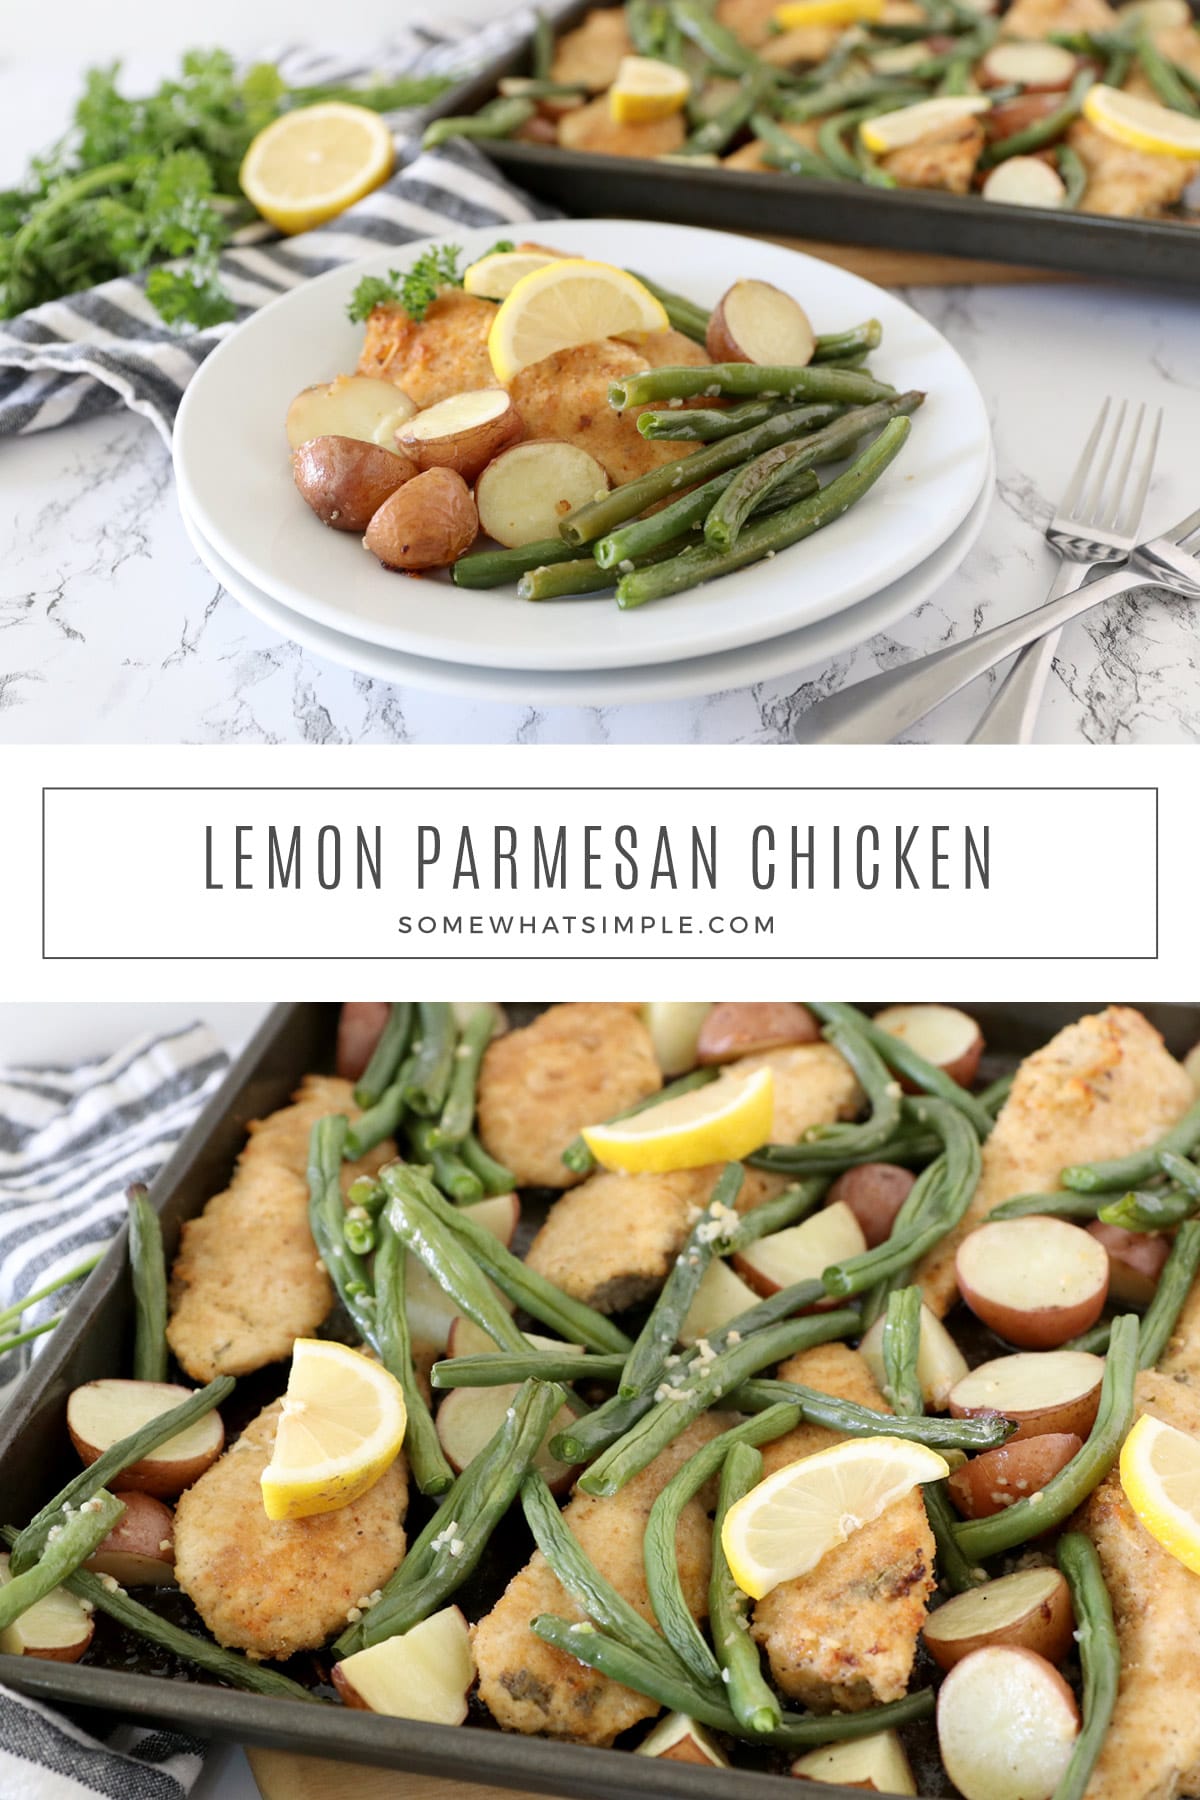 Crispy Lemon Parmesan Chicken BAKED to perfection with delicious vegetables covered in a lemon garlic sauce. It's an easy sheet pan meal that's perfect for any night of the week! via @somewhatsimple